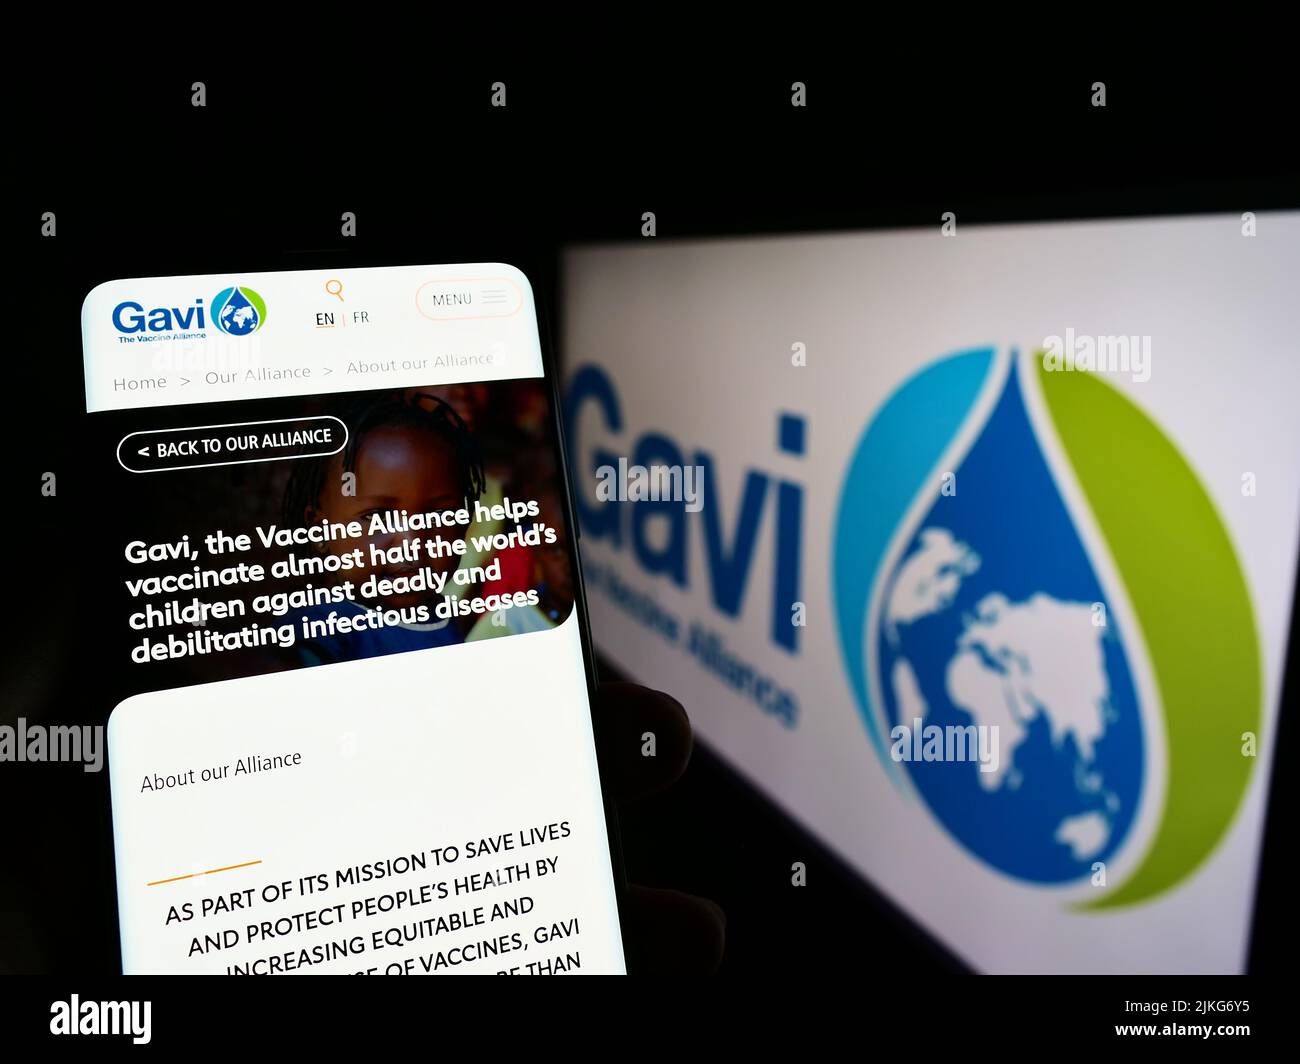 Person holding cellphone with website of health partnership Gavi, the Vaccine Alliance on screen with logo. Focus on center of phone display. Stock Photo